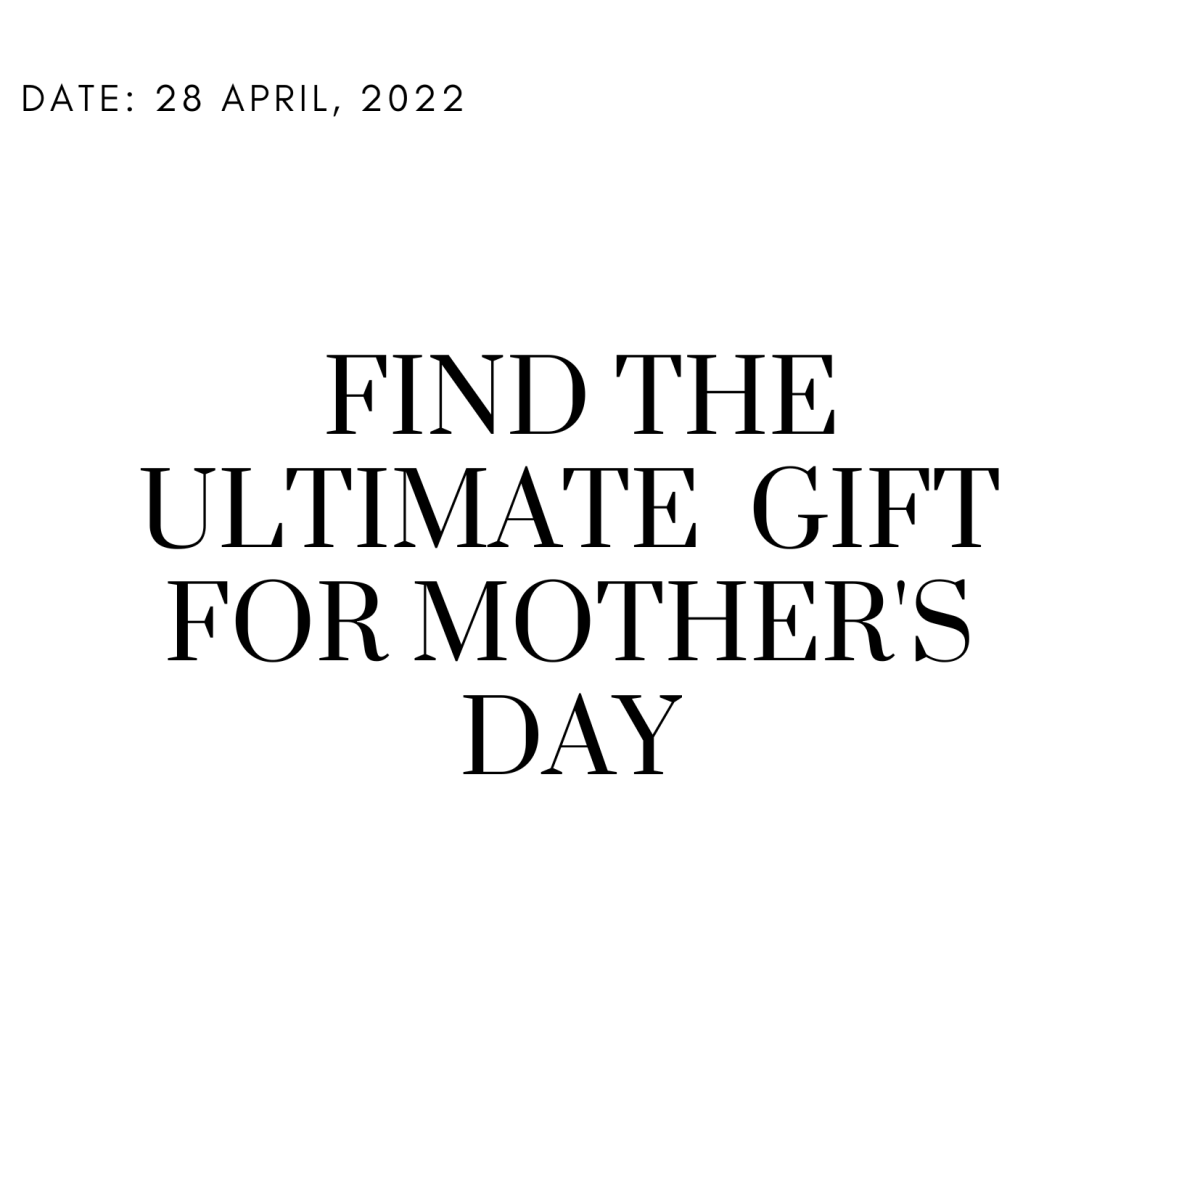 Find the Ultimate Gift for Mother's Day